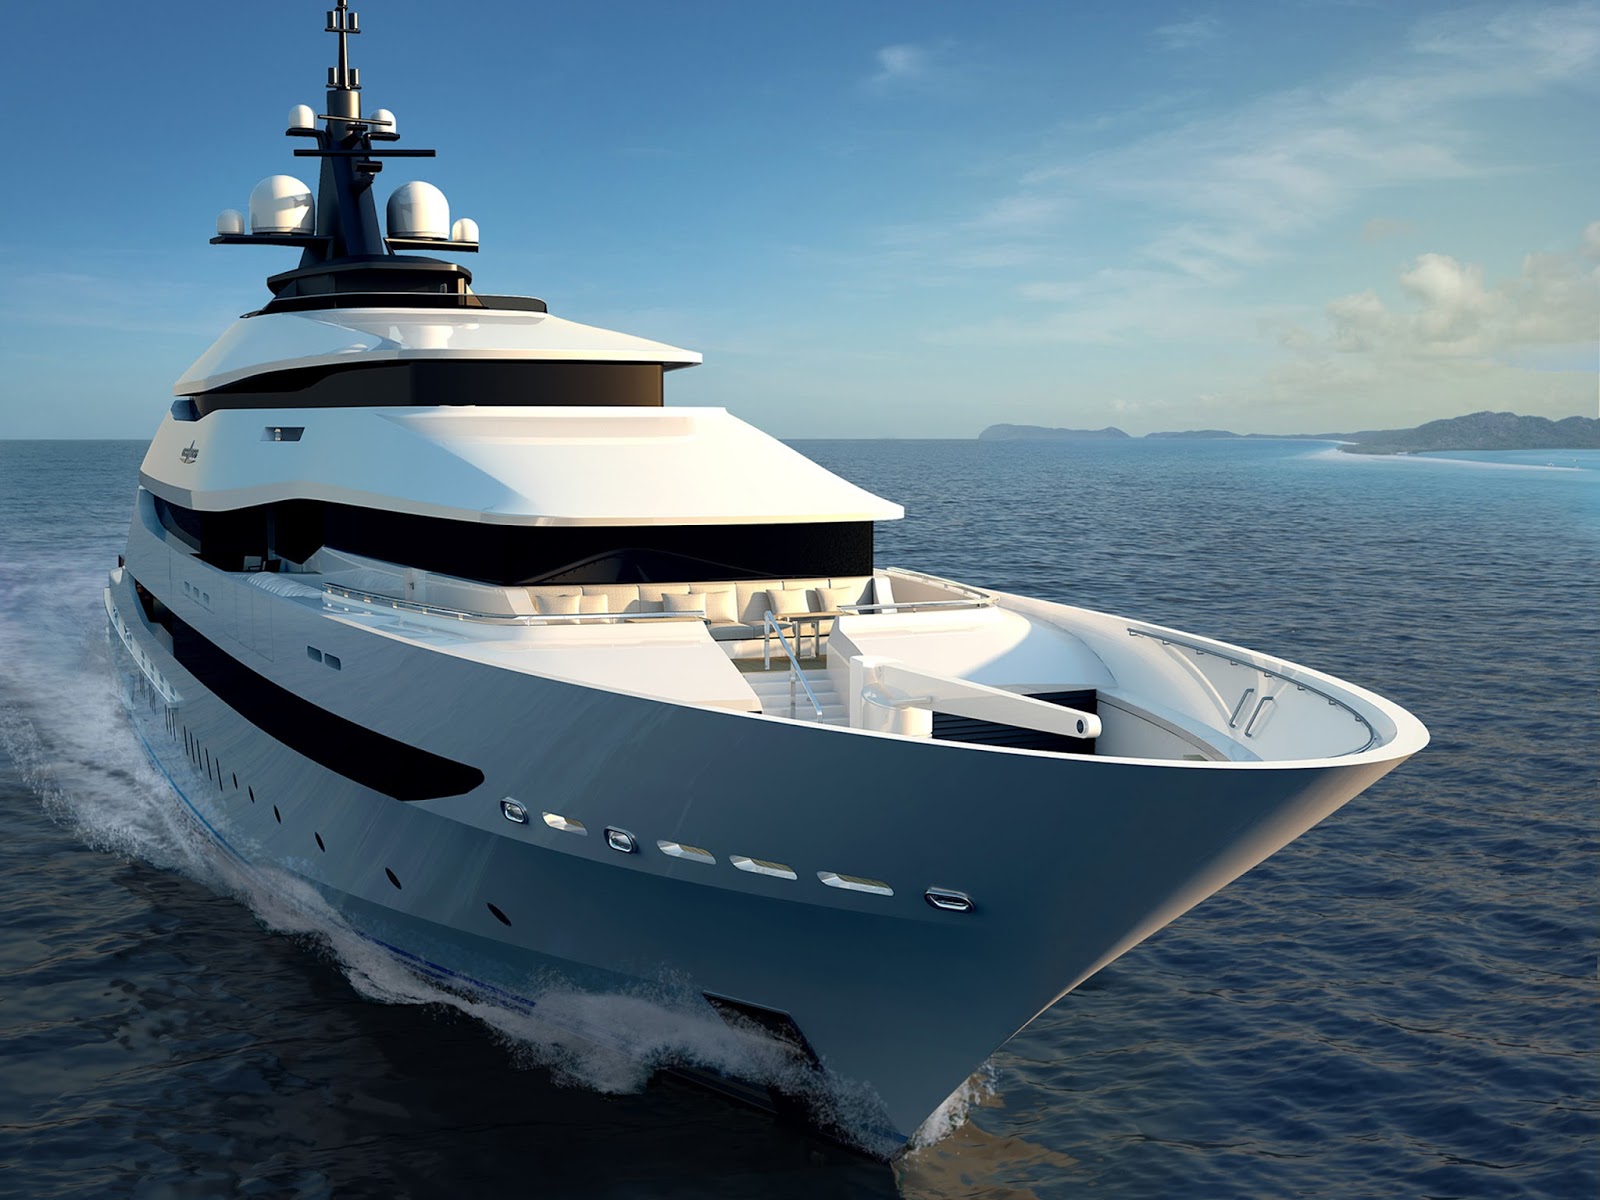 Yacht Pictures Luxury Private Yachts Mega Full HD Desktop